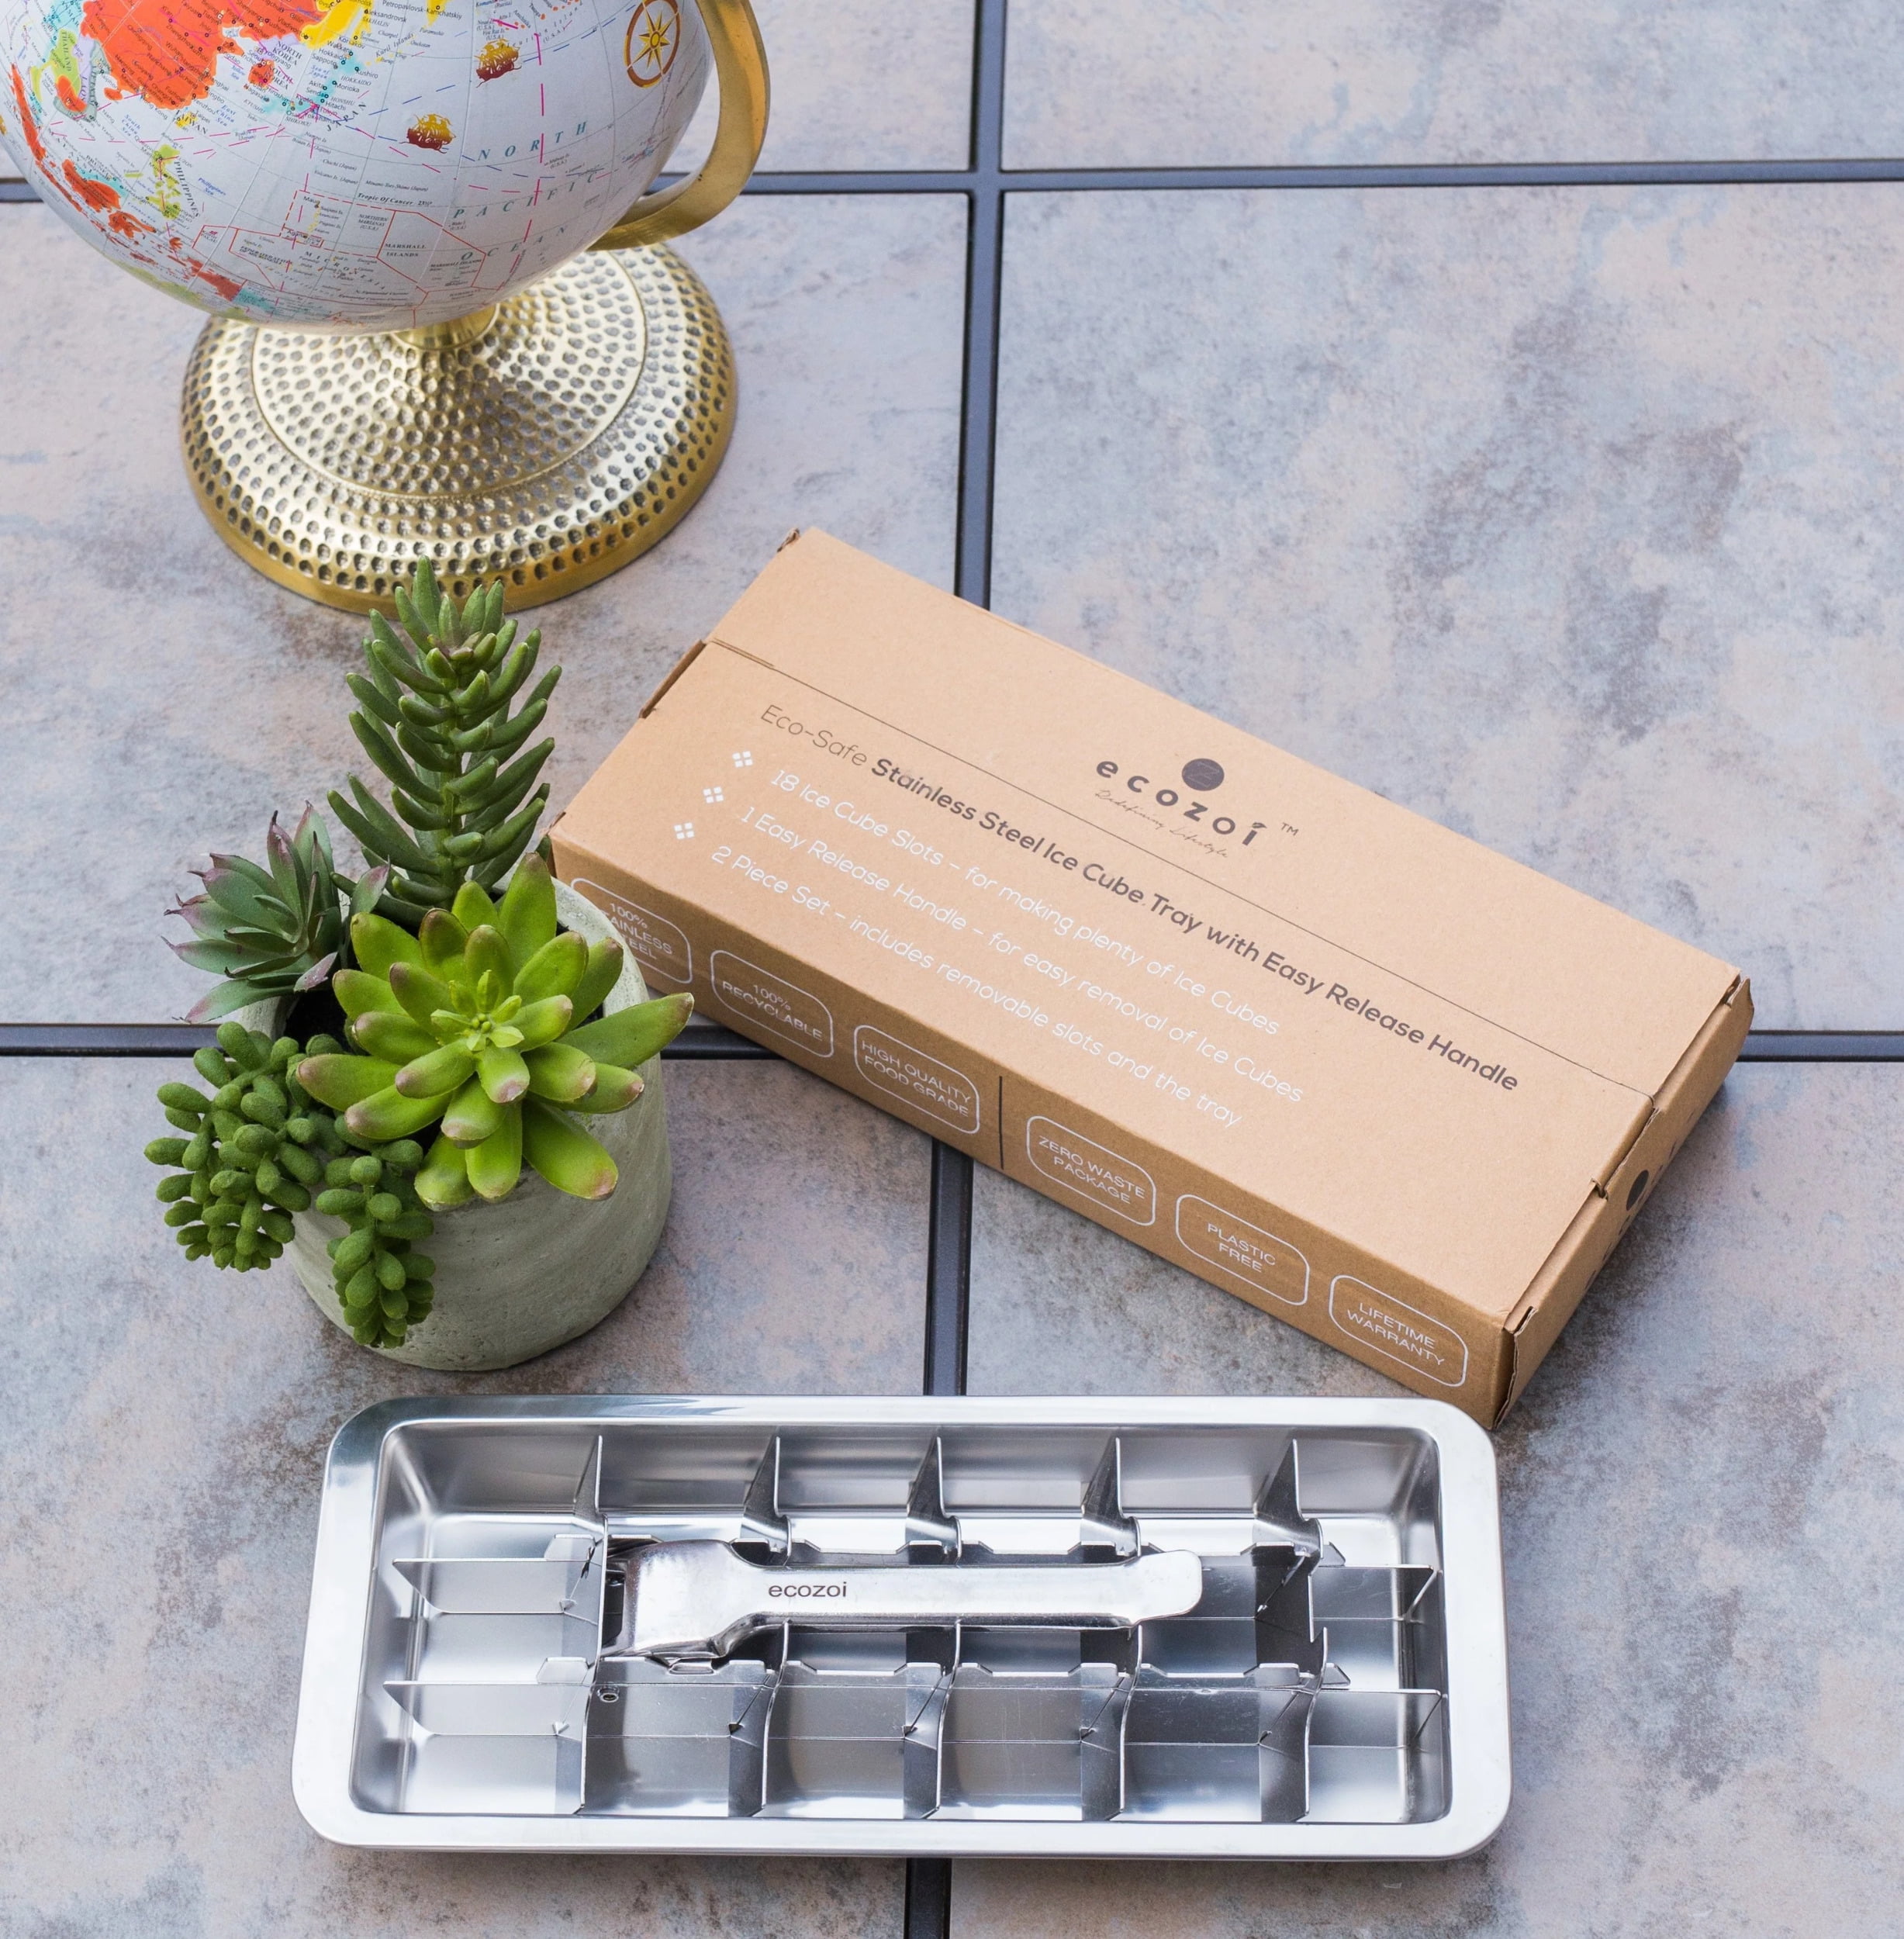 Retro Style Large Ice Cube Tray - Stainless Steel – Bar Supplies